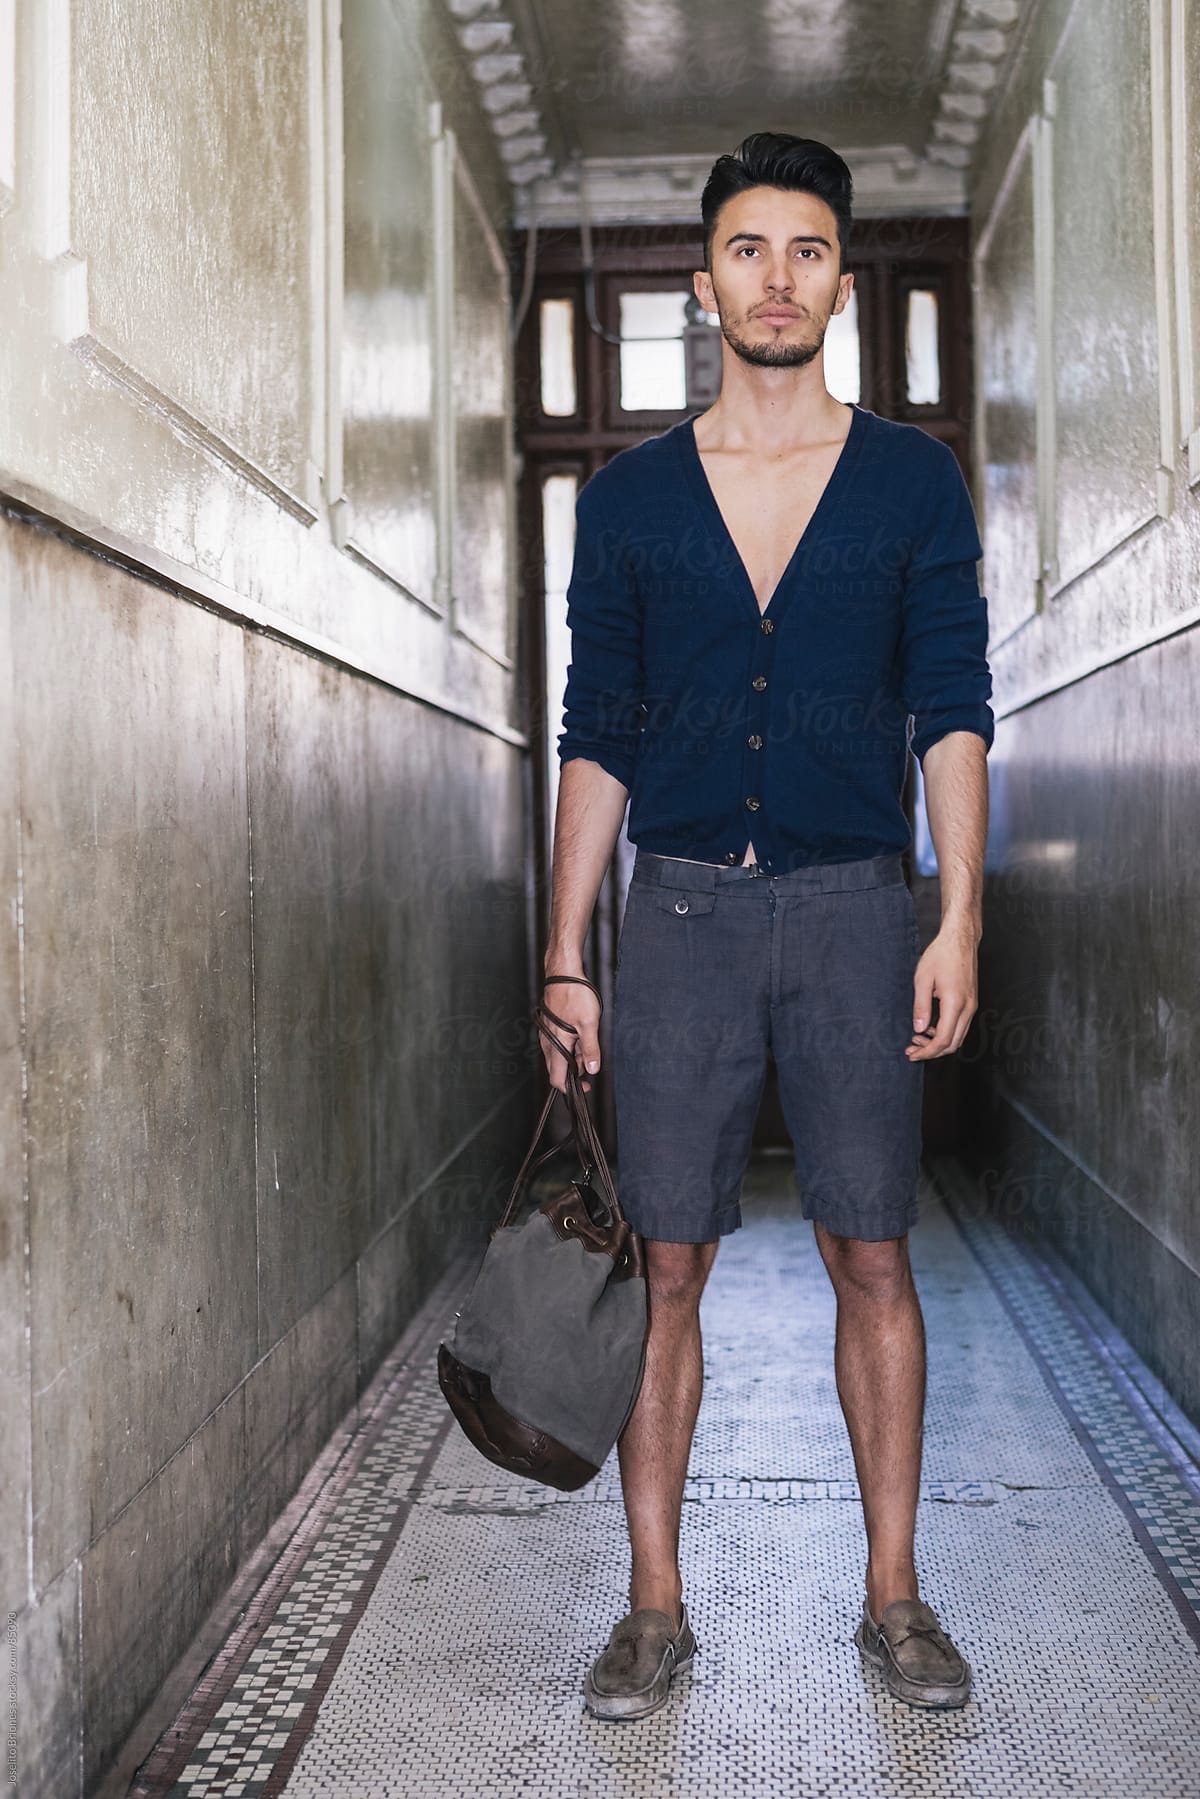 Young Man in Cardigan and Shorts Standing in Hallway